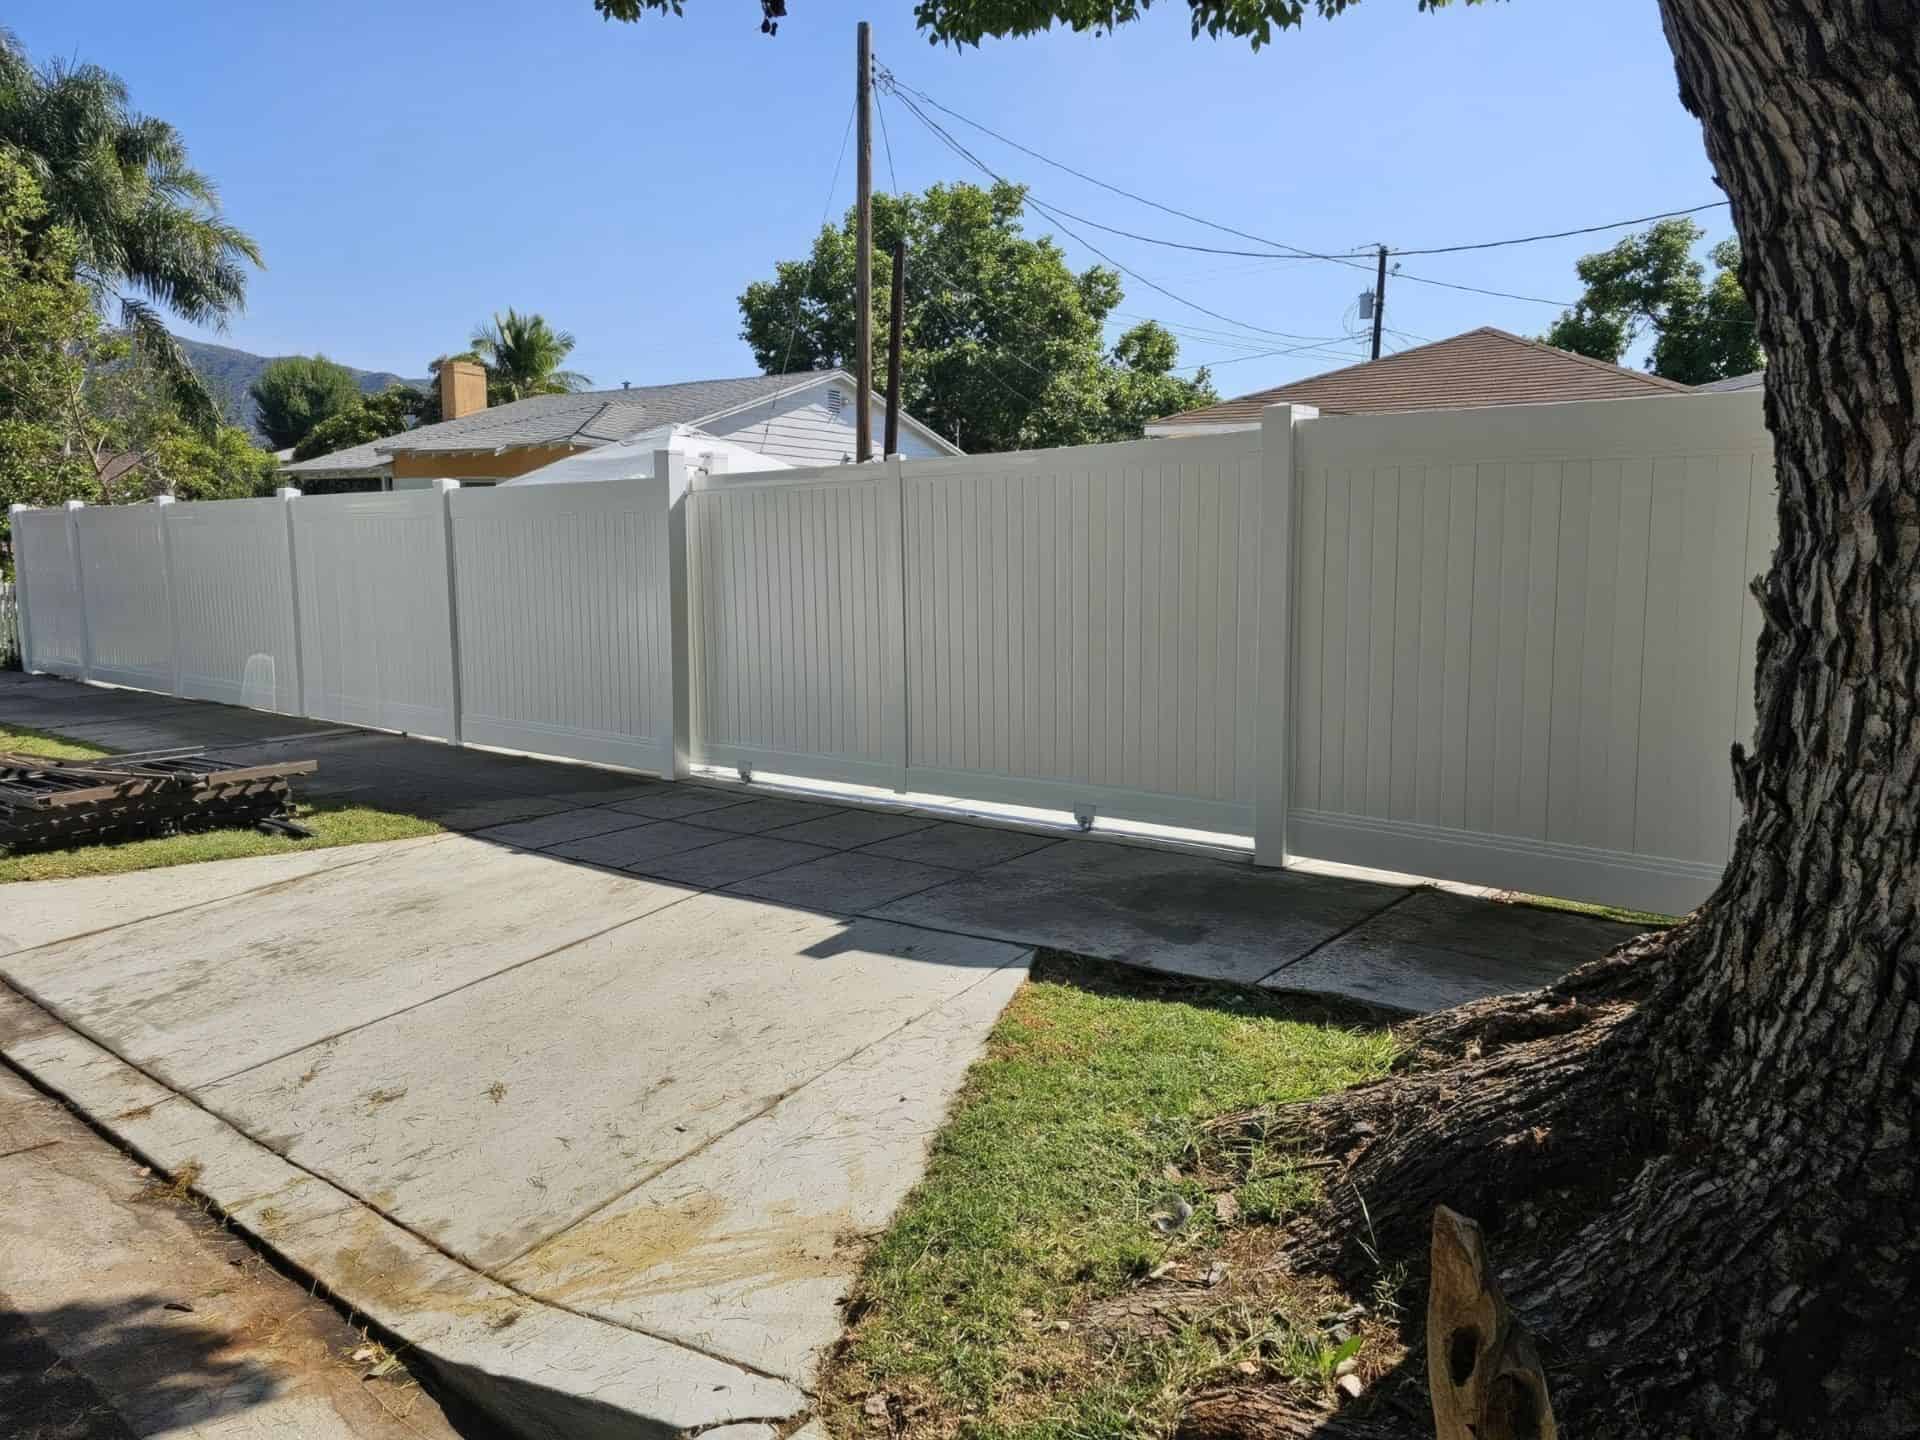 Vinyl rolling gate and fence surrounding townhouse with trees and patches of grass on each side of the entry way.